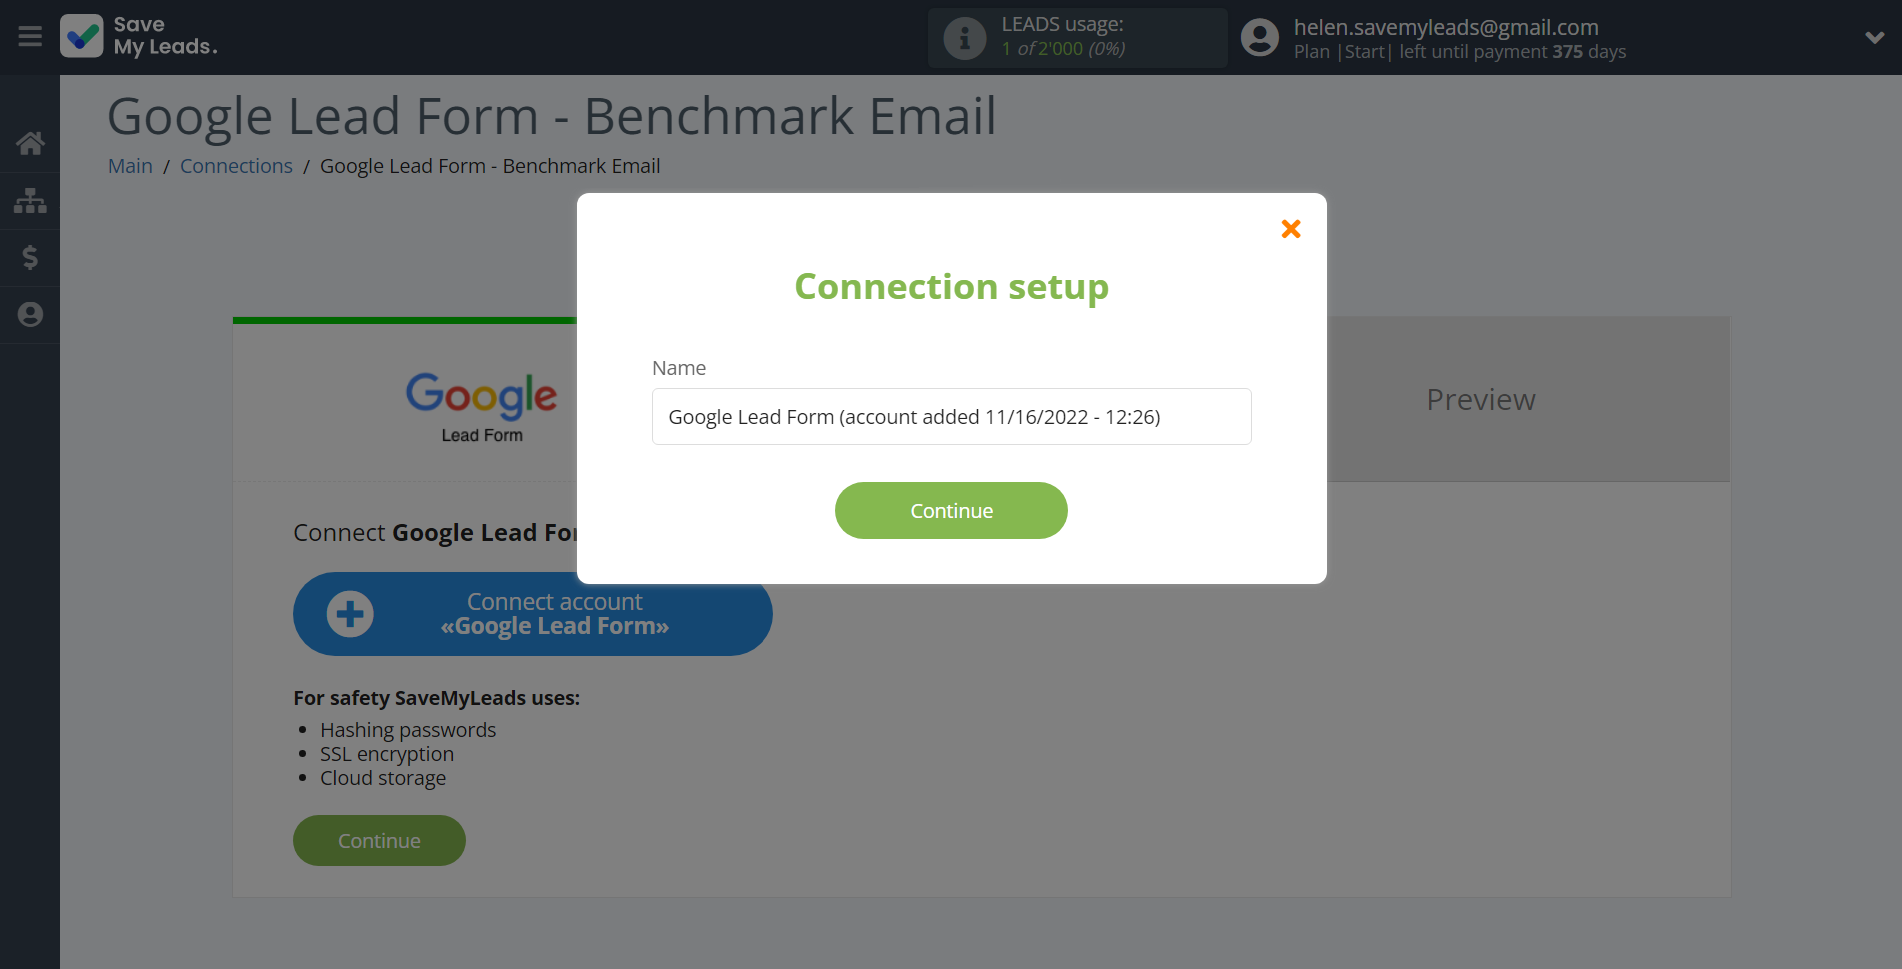 How to Connect Google Lead Form with Benchmark Email | Data Source account connection